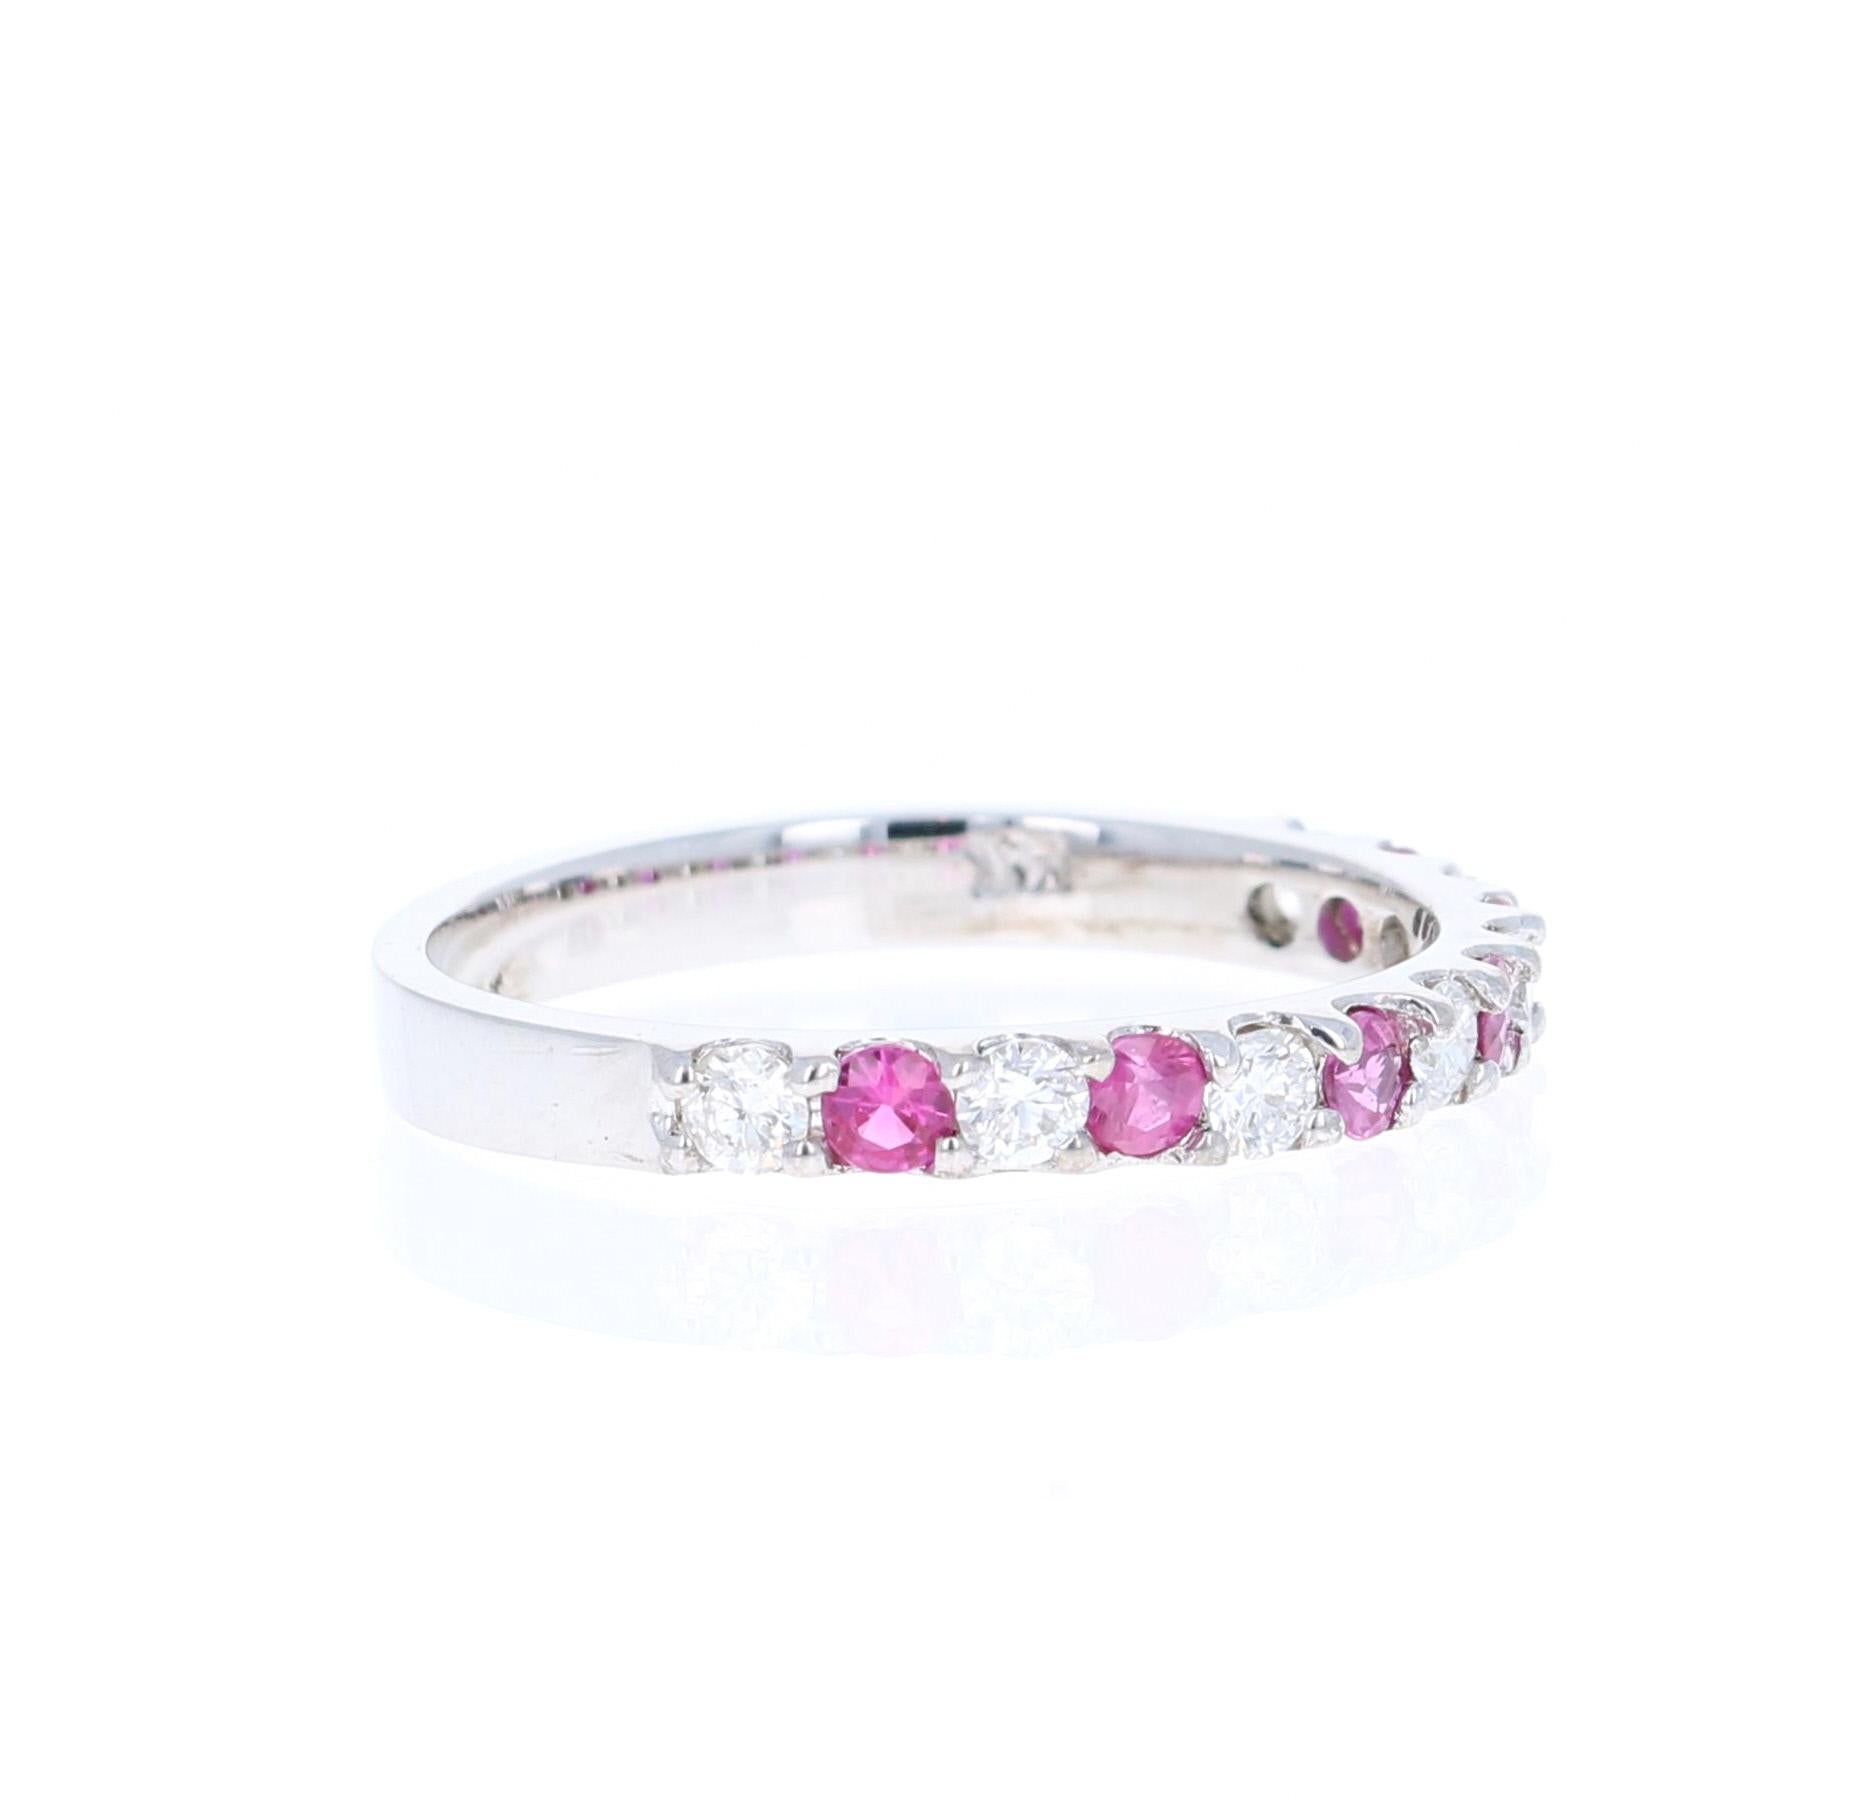 0.62 Carat Ruby and Diamond 14K White Gold Band.

This is a classic band that is a must-have!
It has 6 Rubies that weigh 0.31 Carats and 7 Round Cut Diamonds that weigh 0.31 Carats. (Clarity: SI, Color: F) The Total Carat Weight of the Band is 0.62